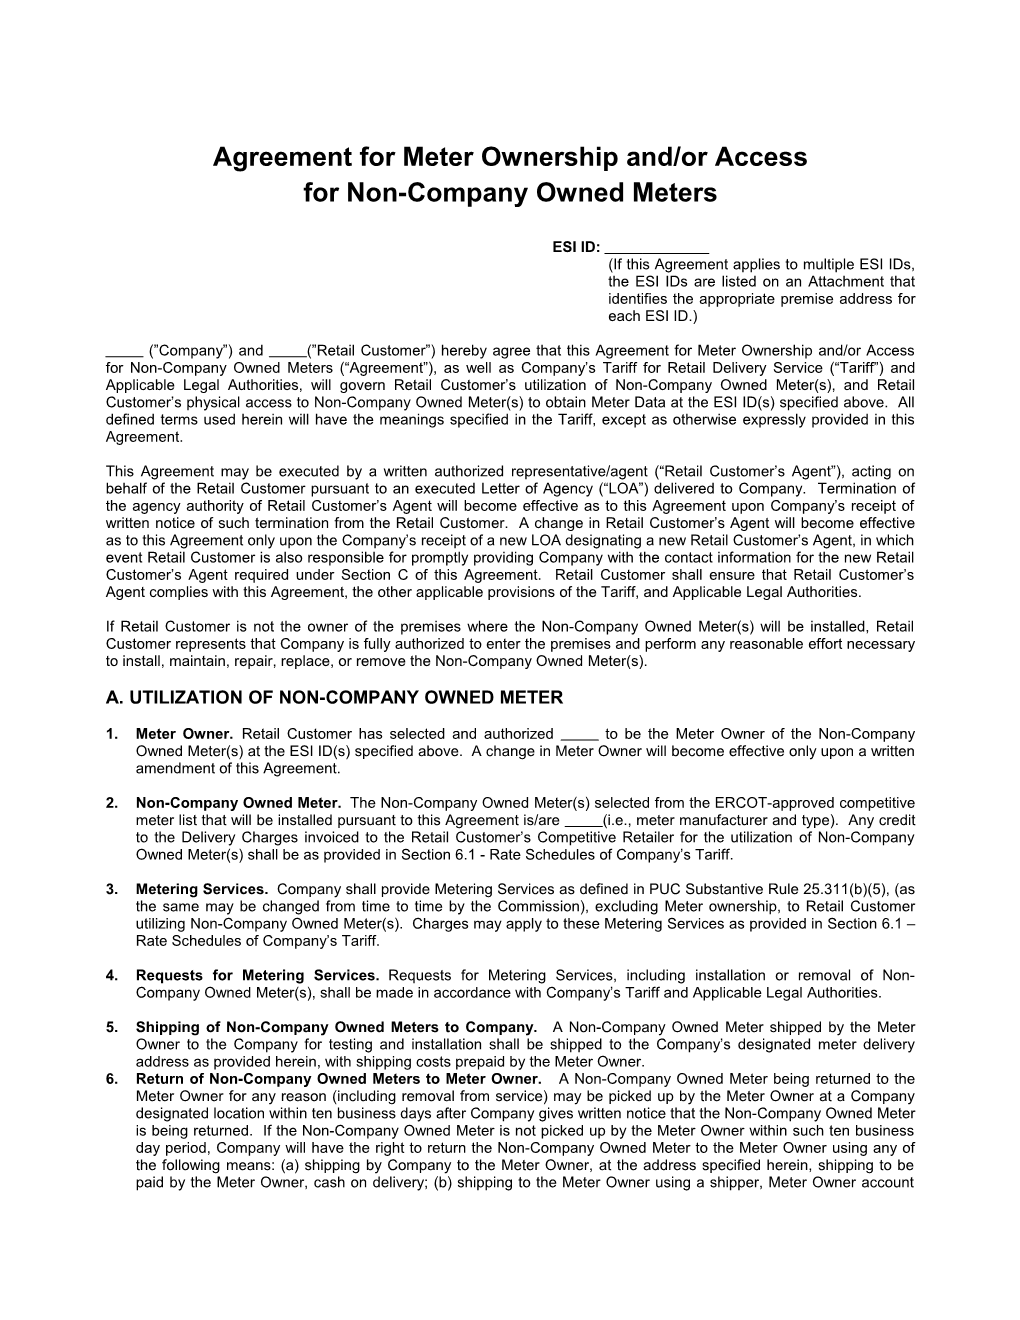 Agreement for Meter Ownership And/Or Access